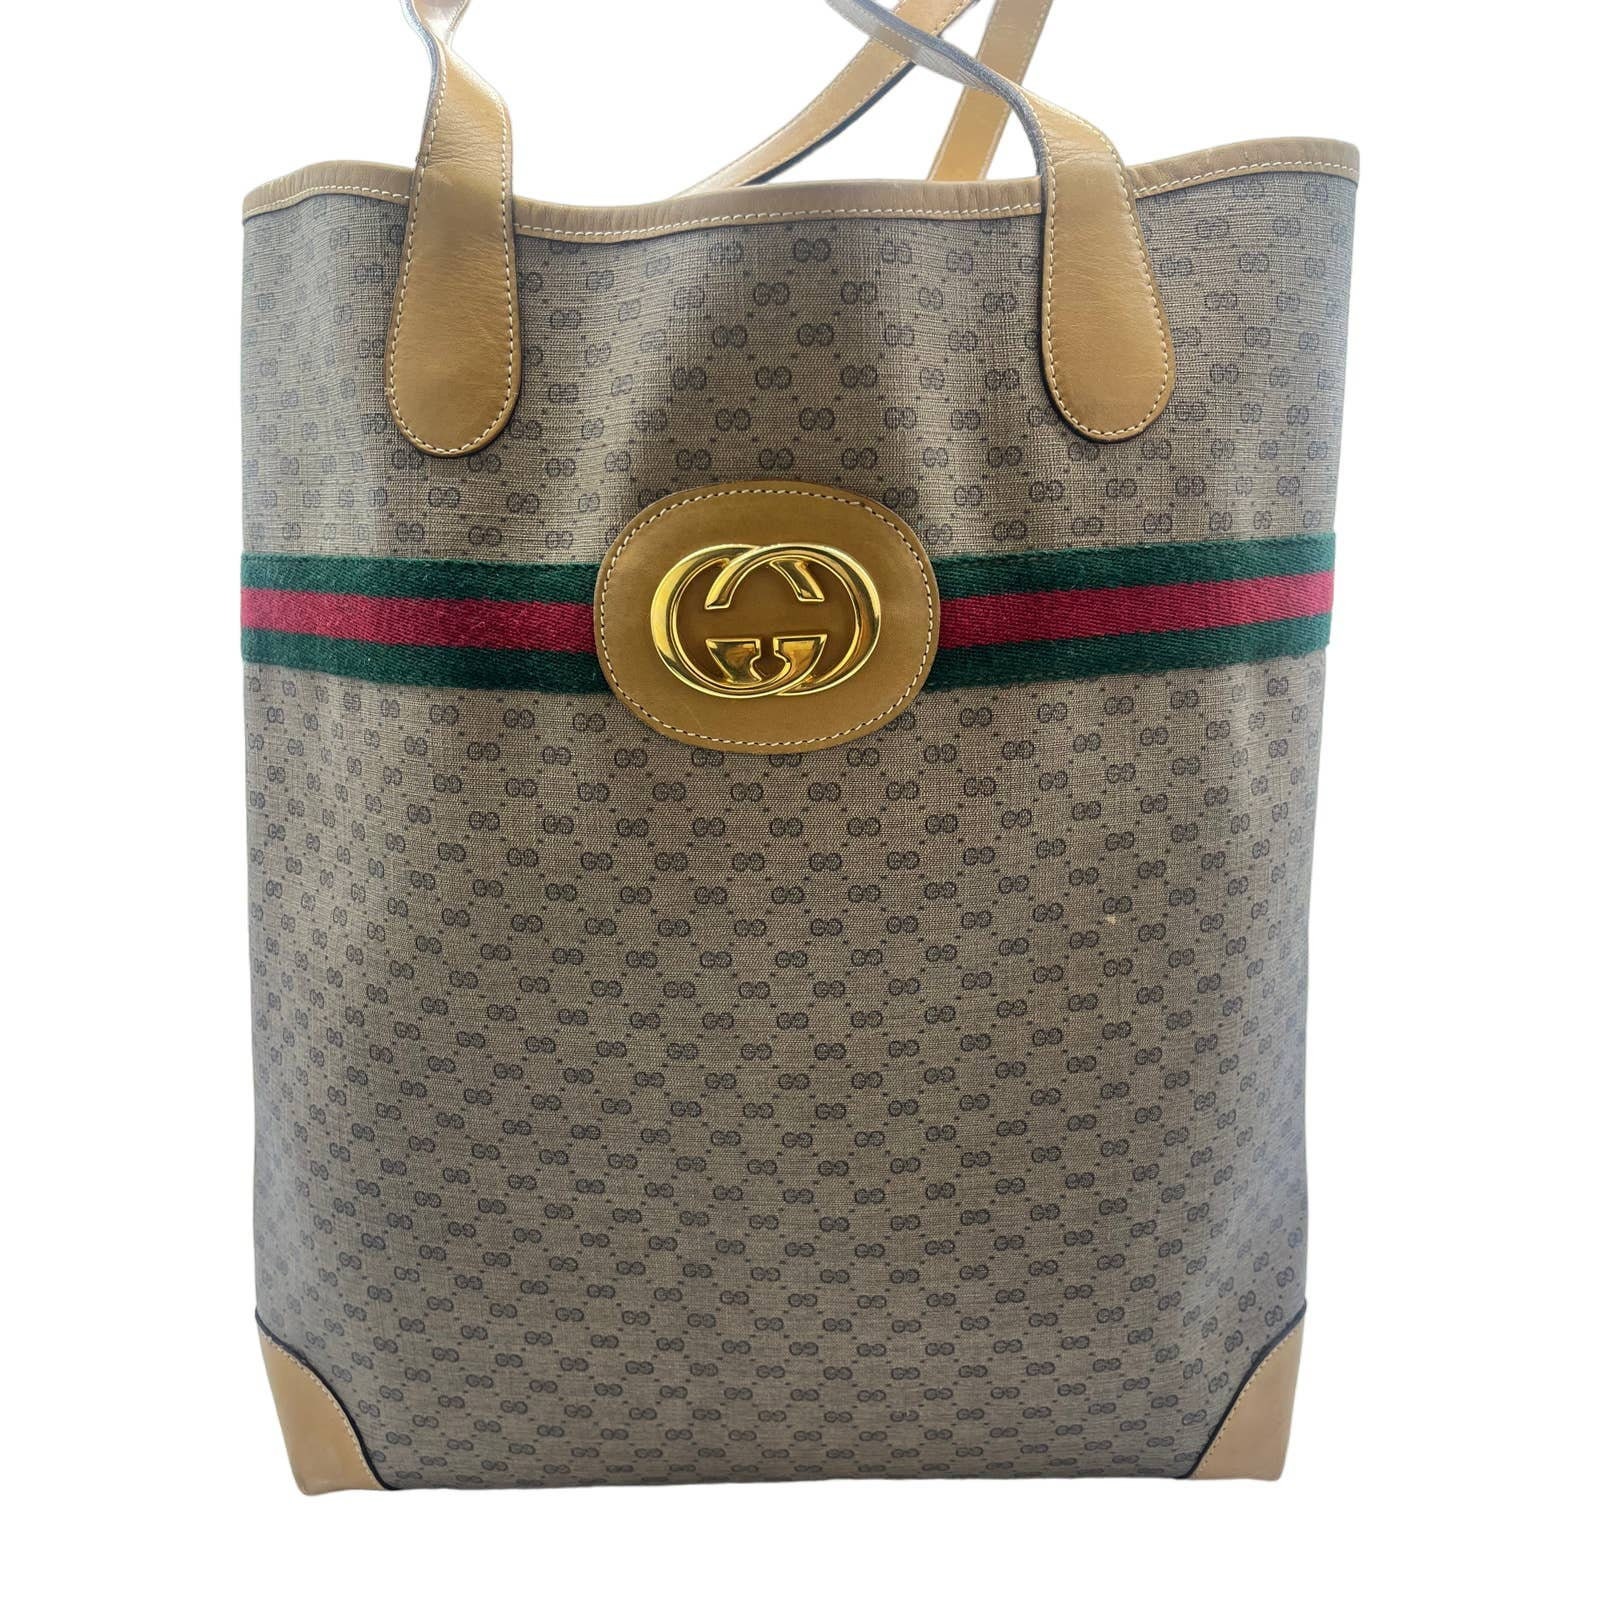 Buy Free Shipping GUCCI Old Gucci Vintage GG Logo Hardware Sherry